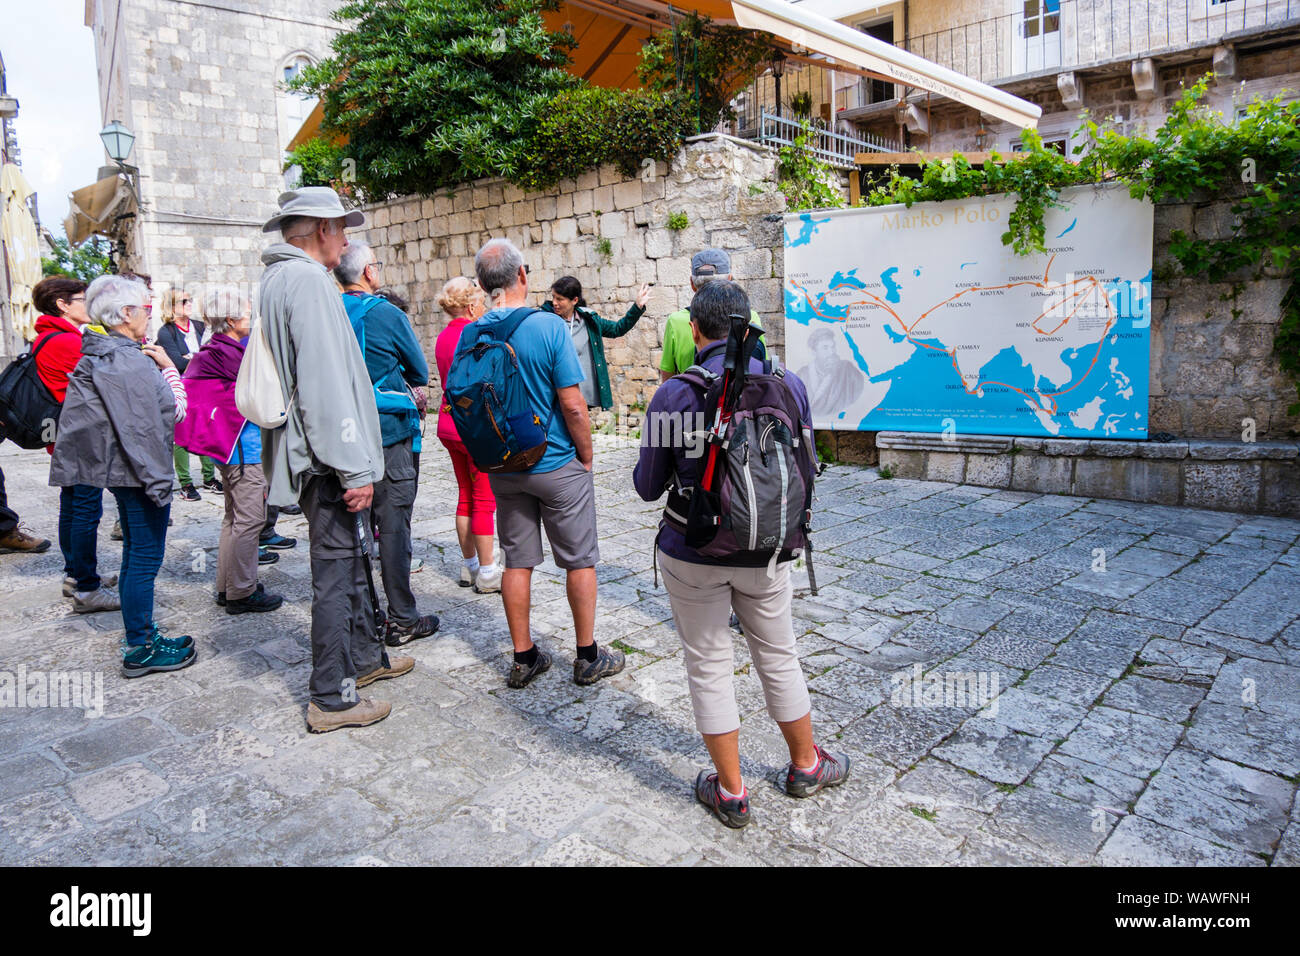 Guided tour group in front of a map showing Marco Polo's travels, Old town, Korcula town, Korcula island, Dalmatia, Croatia Stock Photo